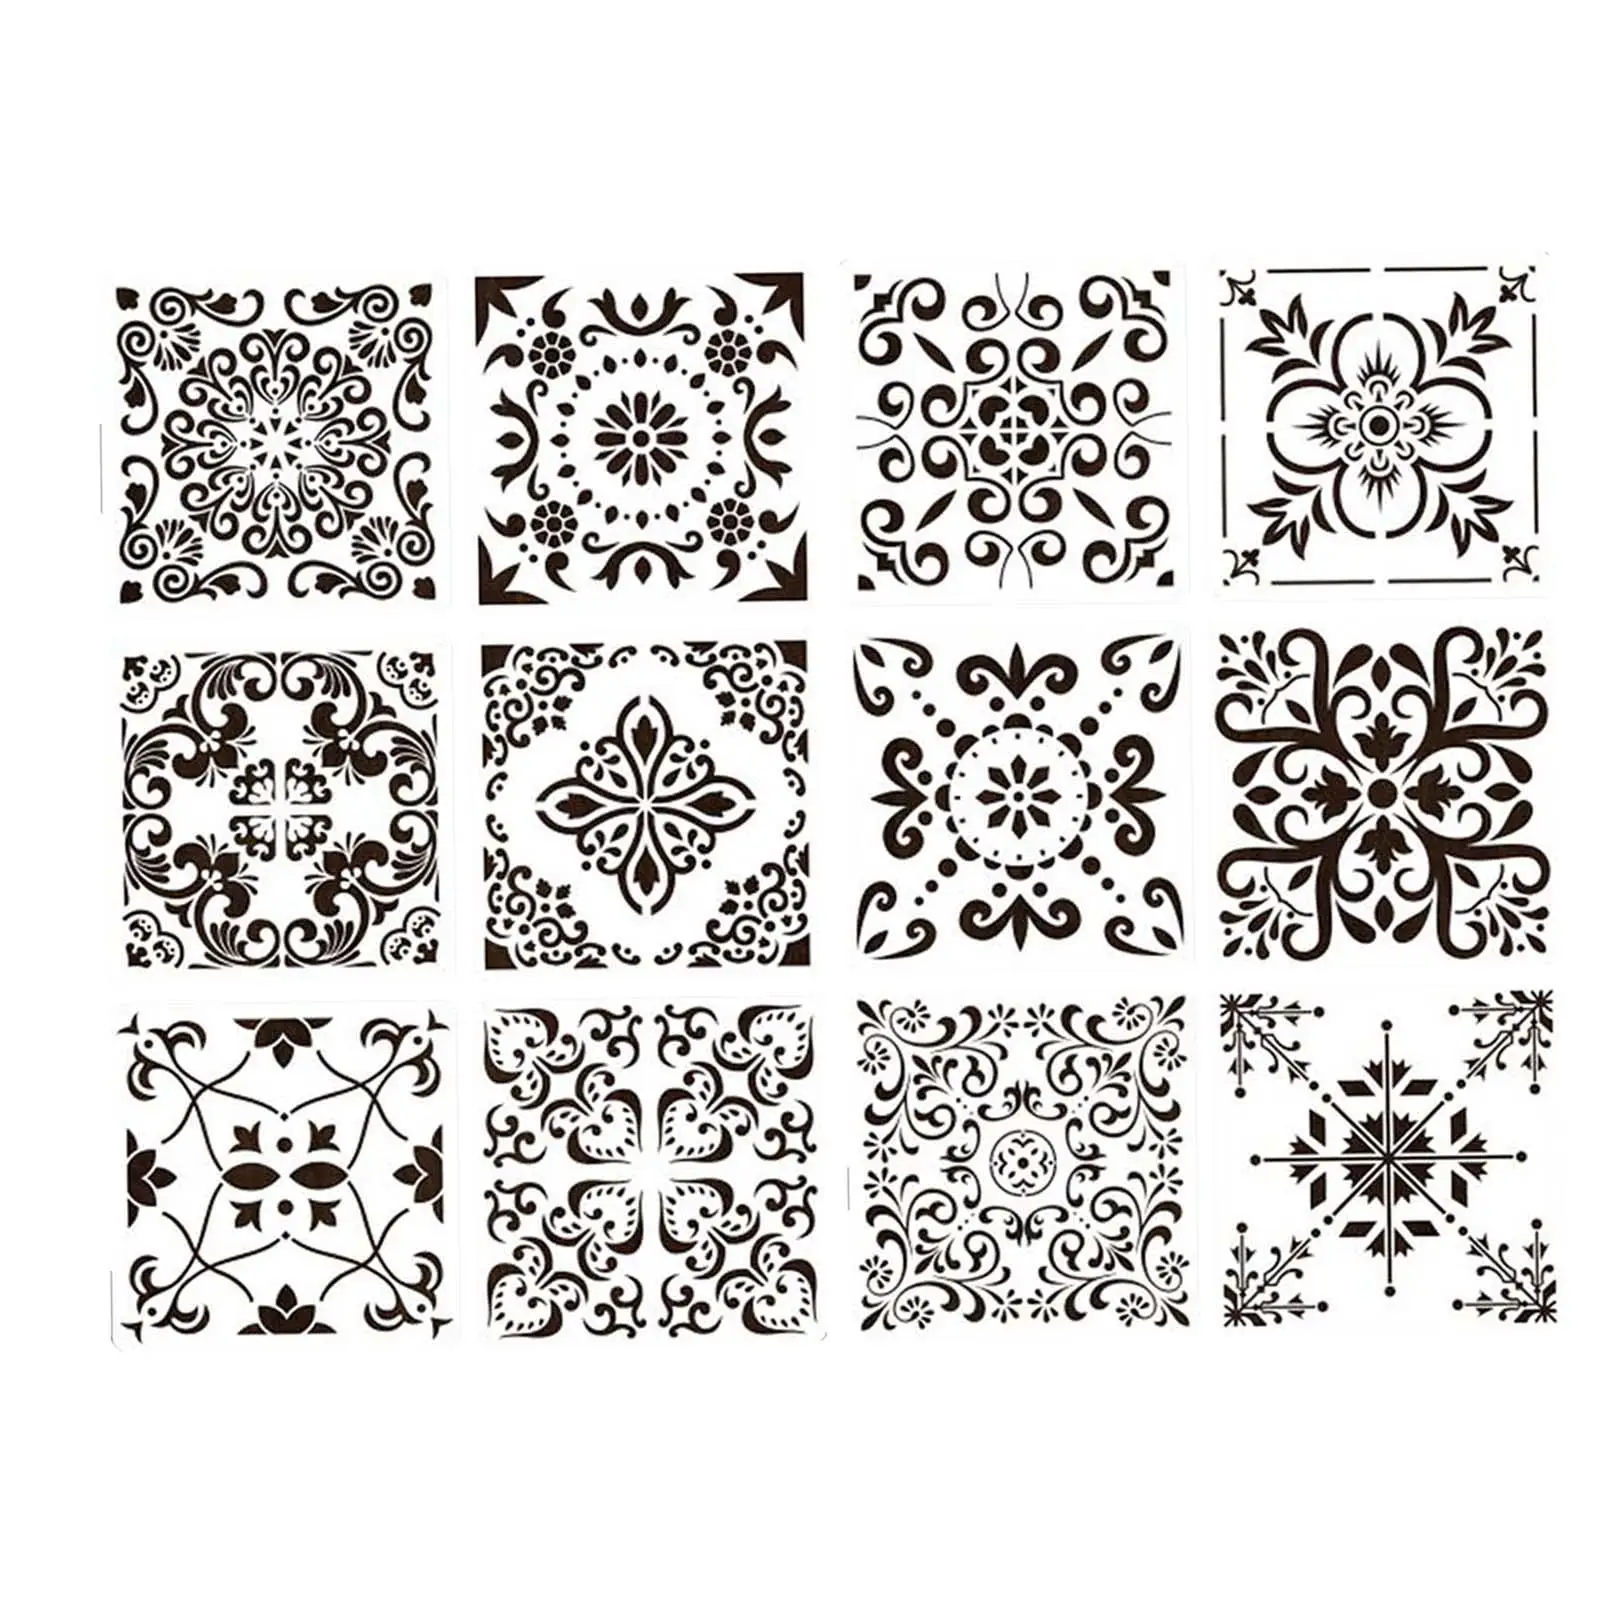 12x Drawing Templates Art Craft Tool Reusable Painting Handmade Mandala Stencil Template for Tile Projects Metal Decor